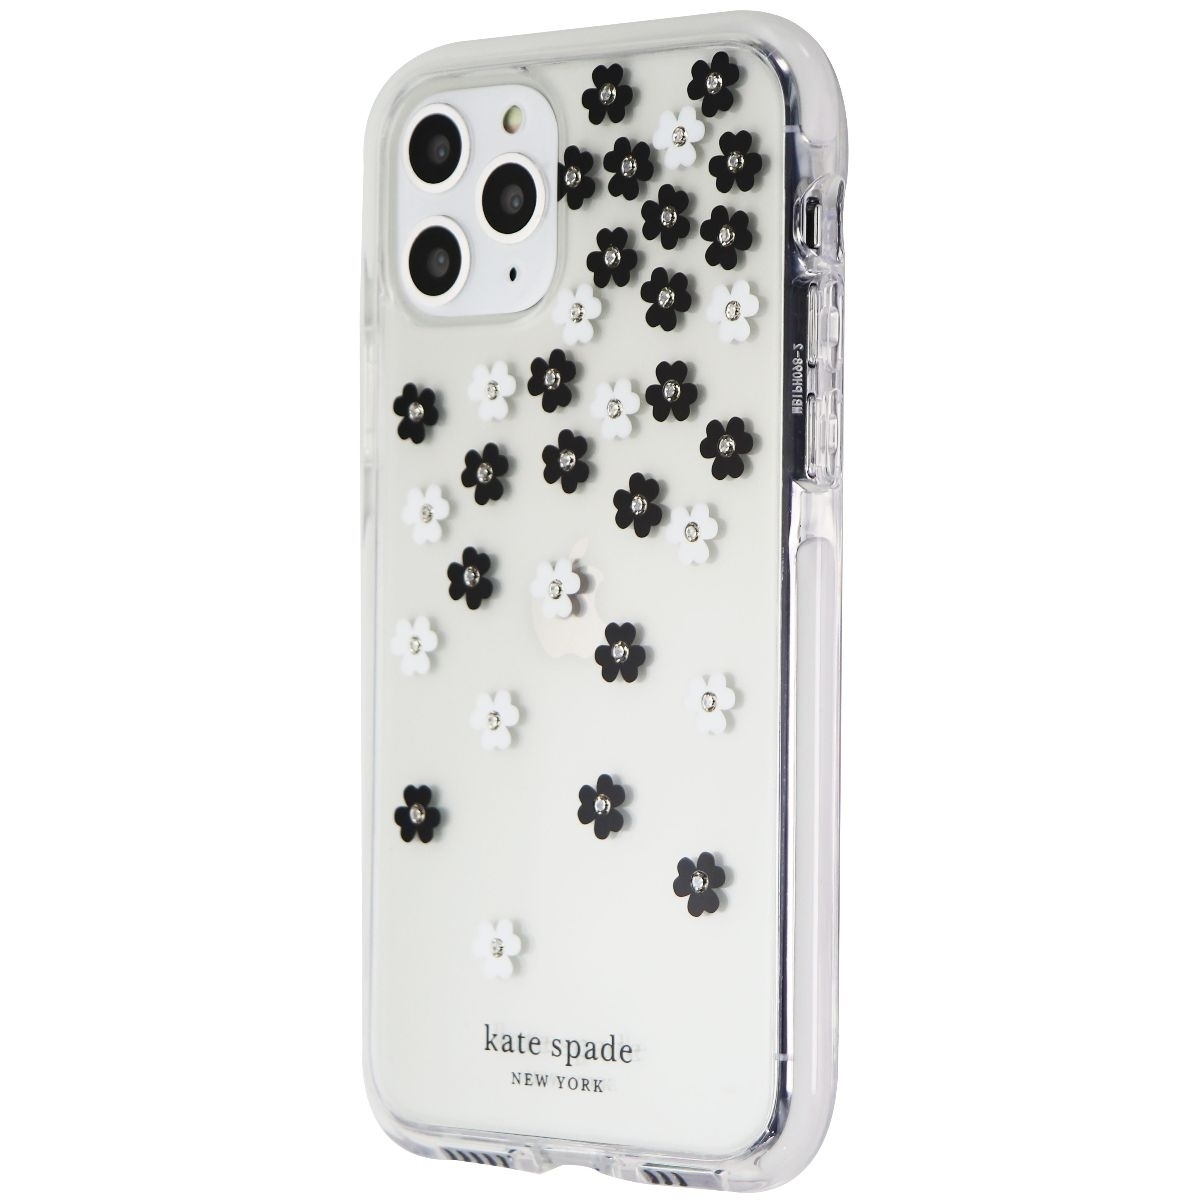 Kate Spade Defensive Hardshell Case For IPhone 11 Pro (5.8) - Scattered Flowers